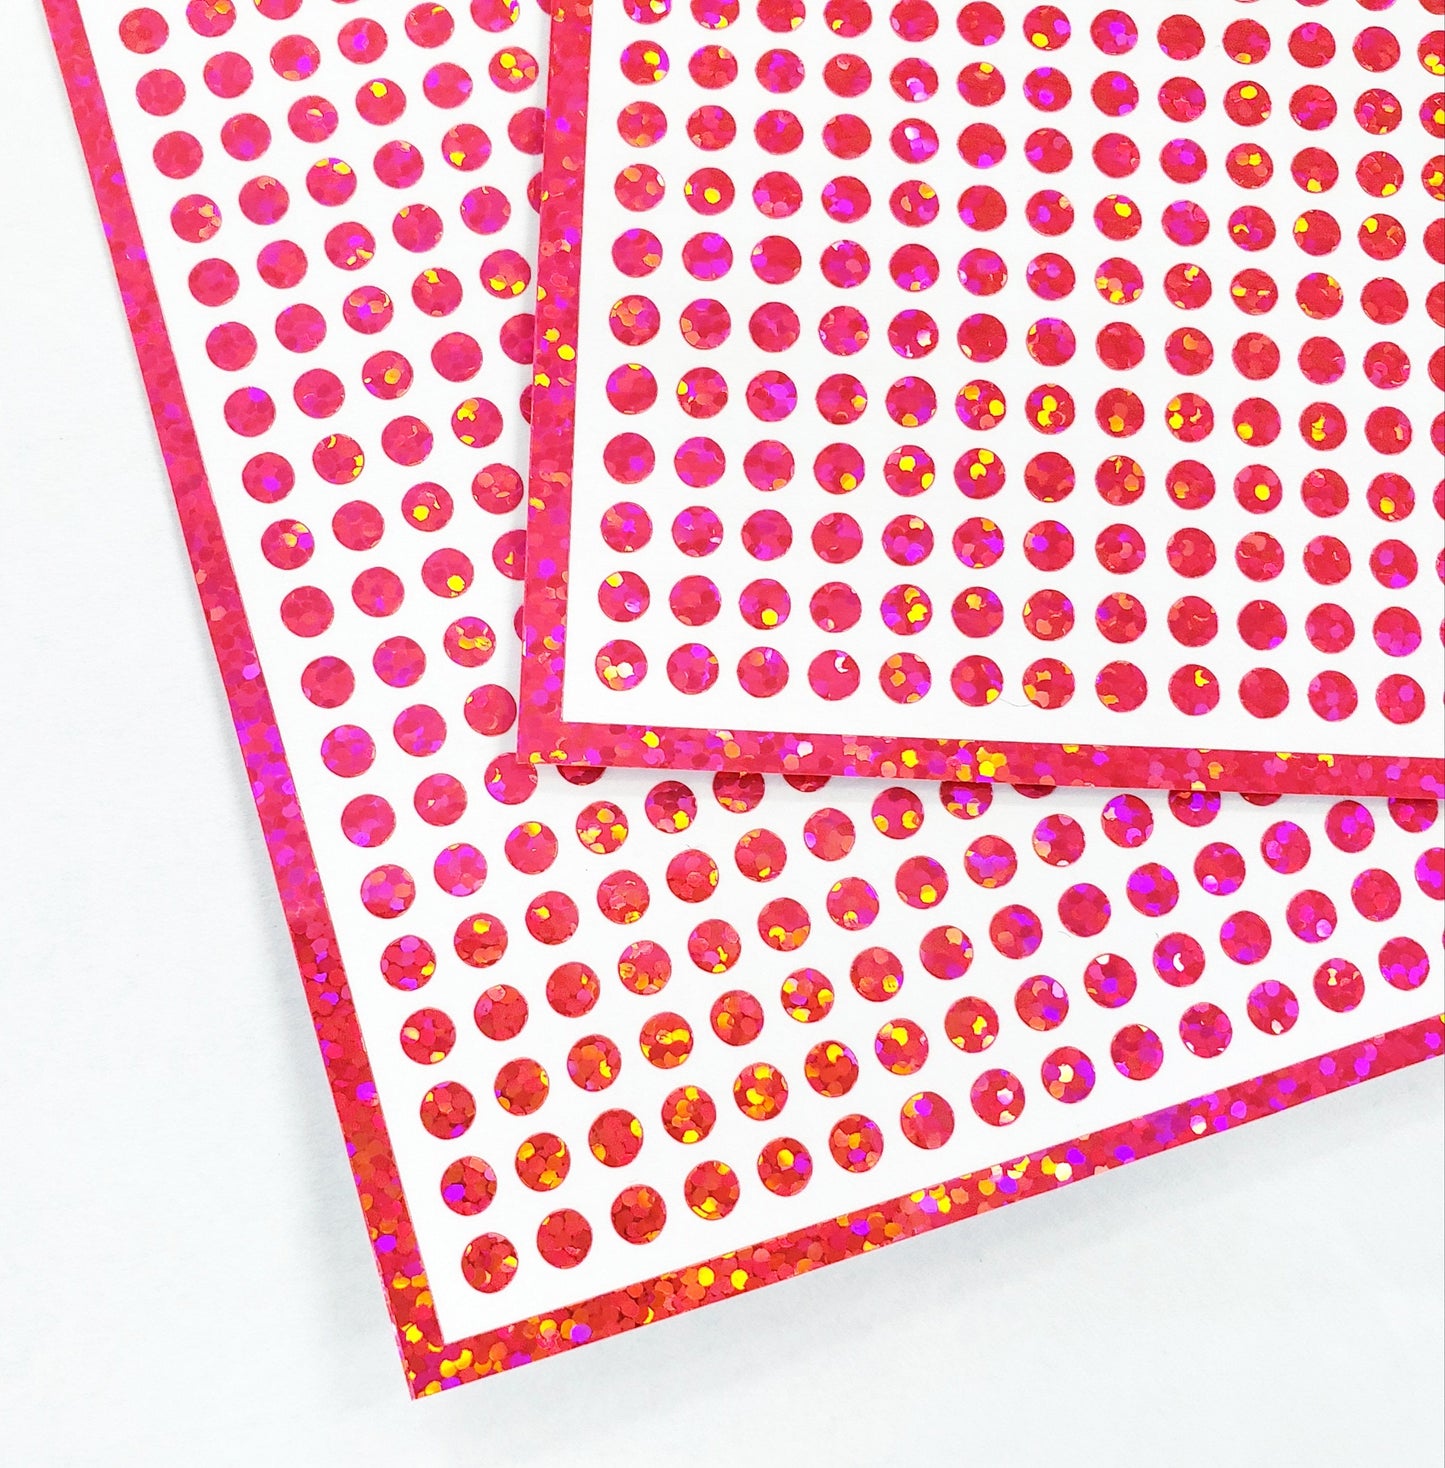 Extra Small Pink Dot Stickers, set of 750 micro sized neon pink glitter dots for daily journals, planners, trackers, calendars and crafts.